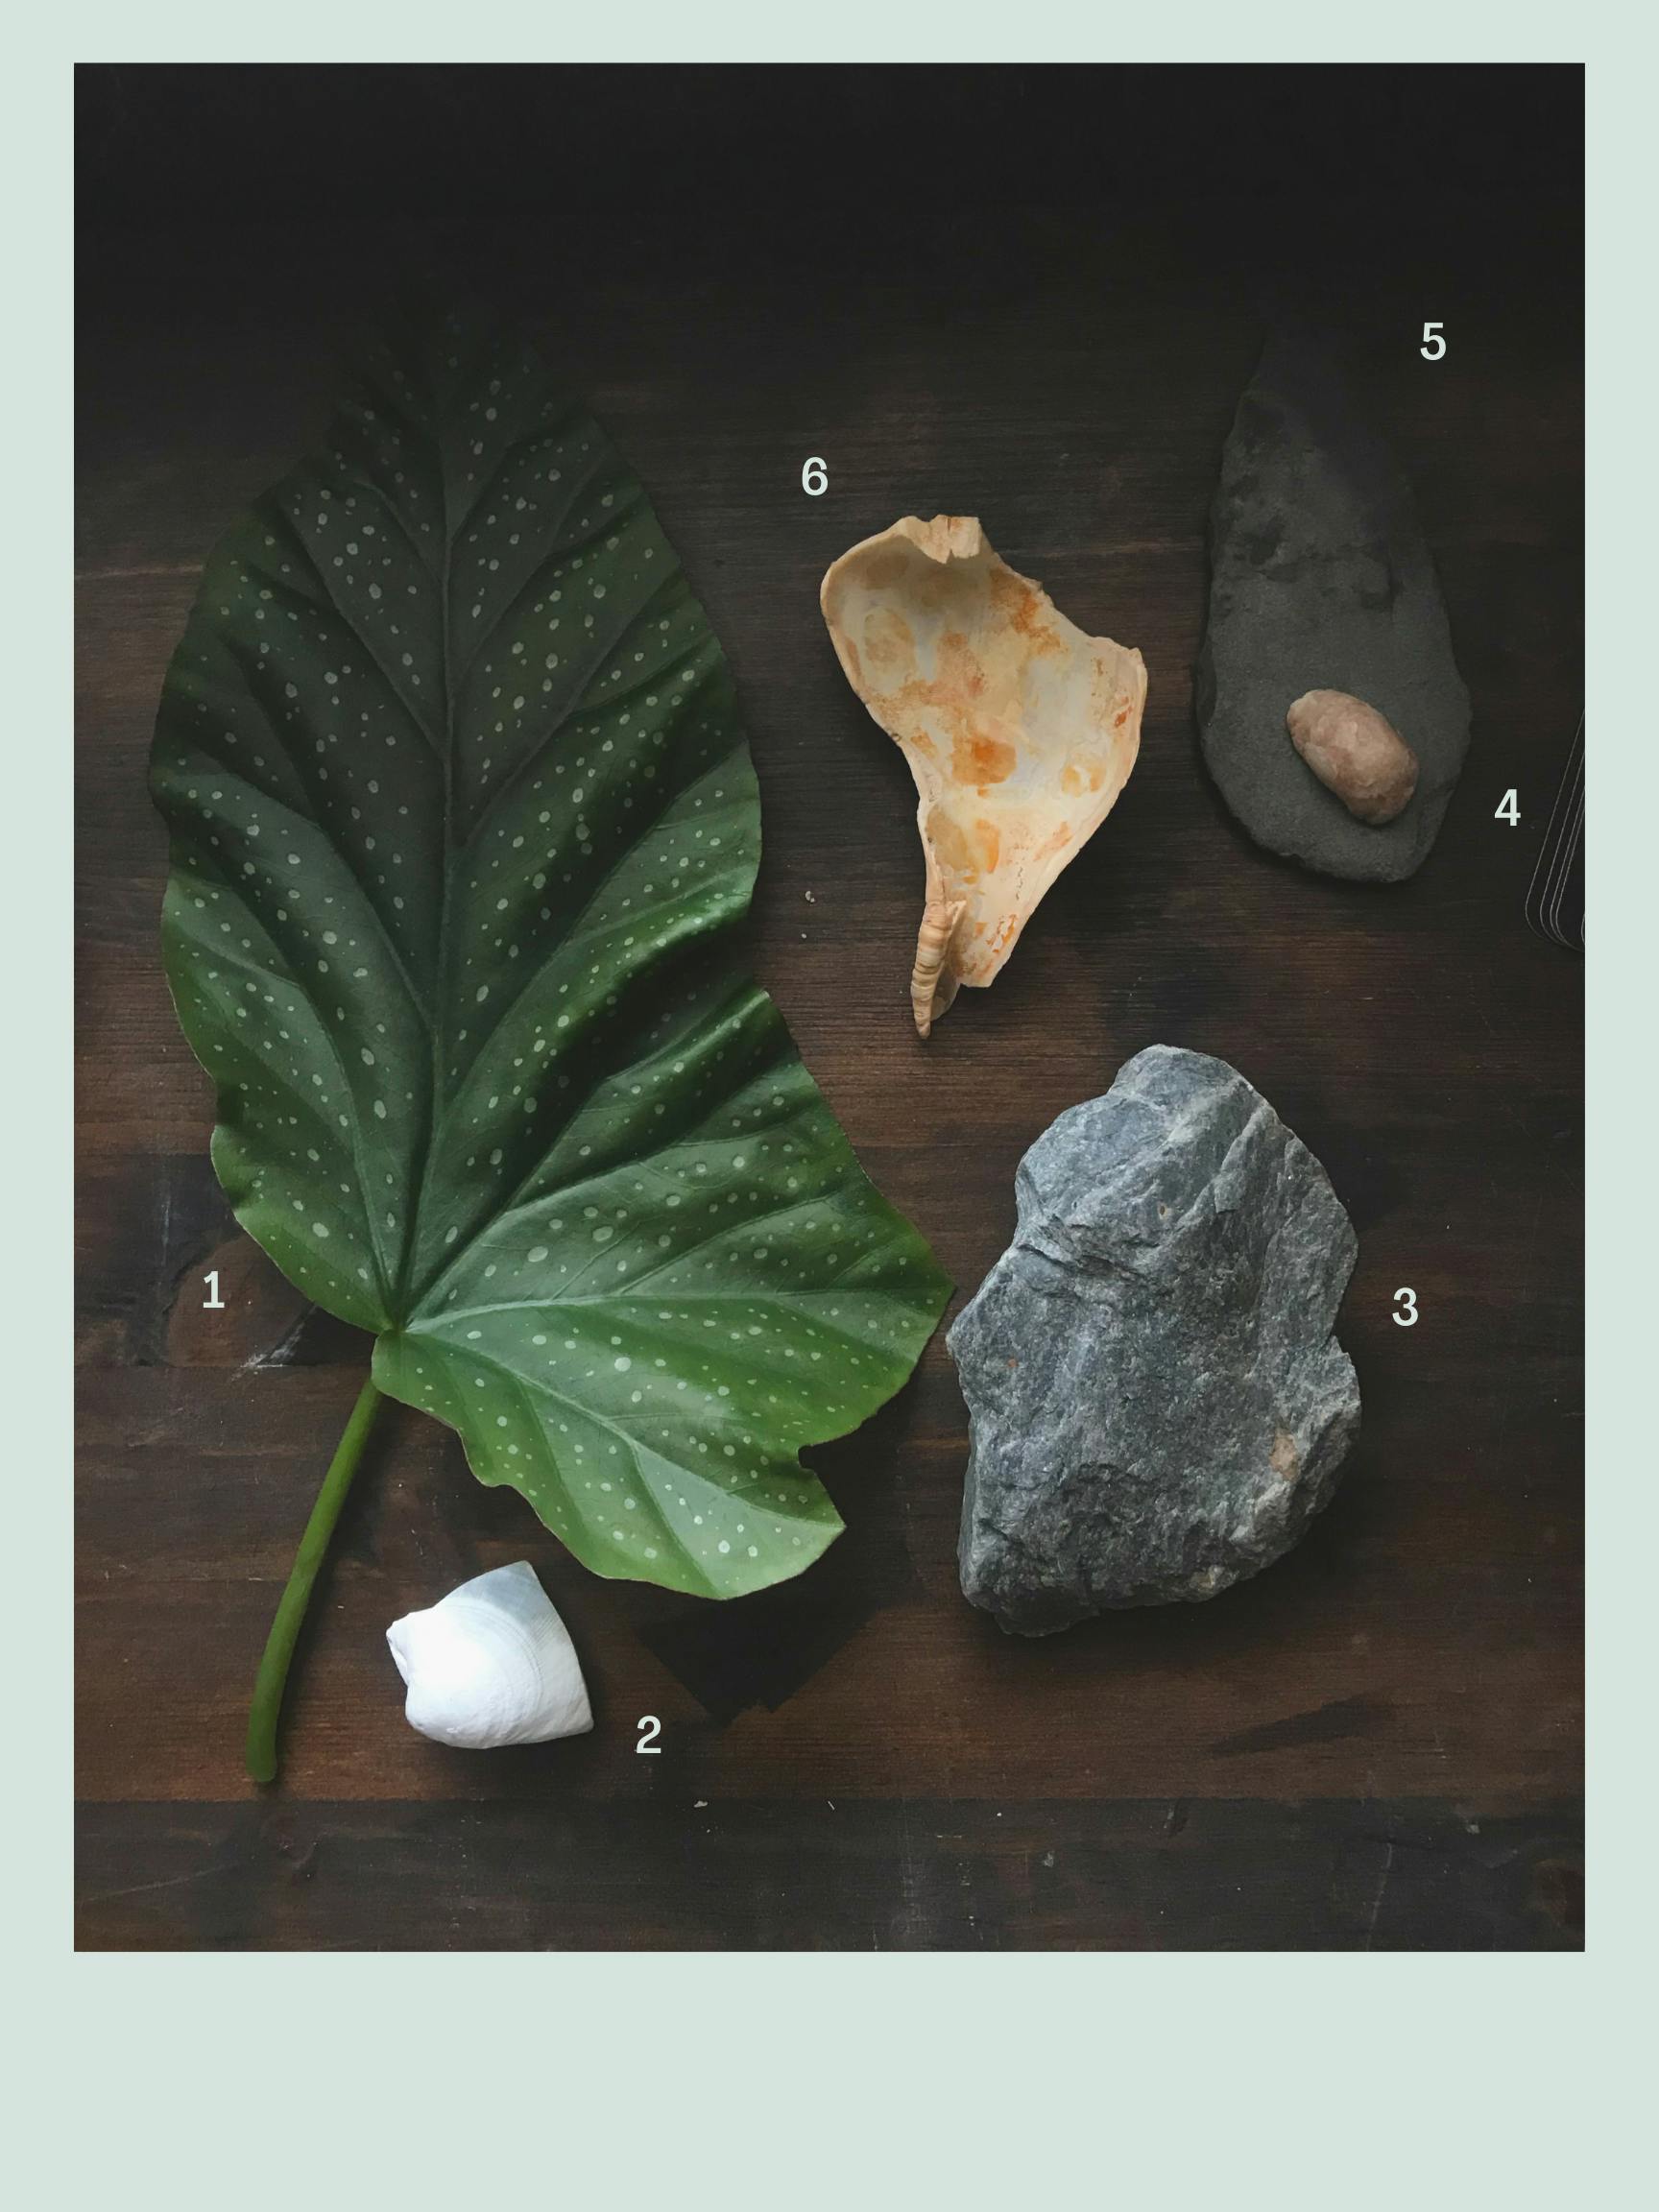 a collection of objects, labeled with small numbers, sits on a desk. From left to right, a leaf from a begonia plant, a broken white and blue shell, a gray rock about the size of a fist, a peach colored rock, a piece of slate, and an orange shell.